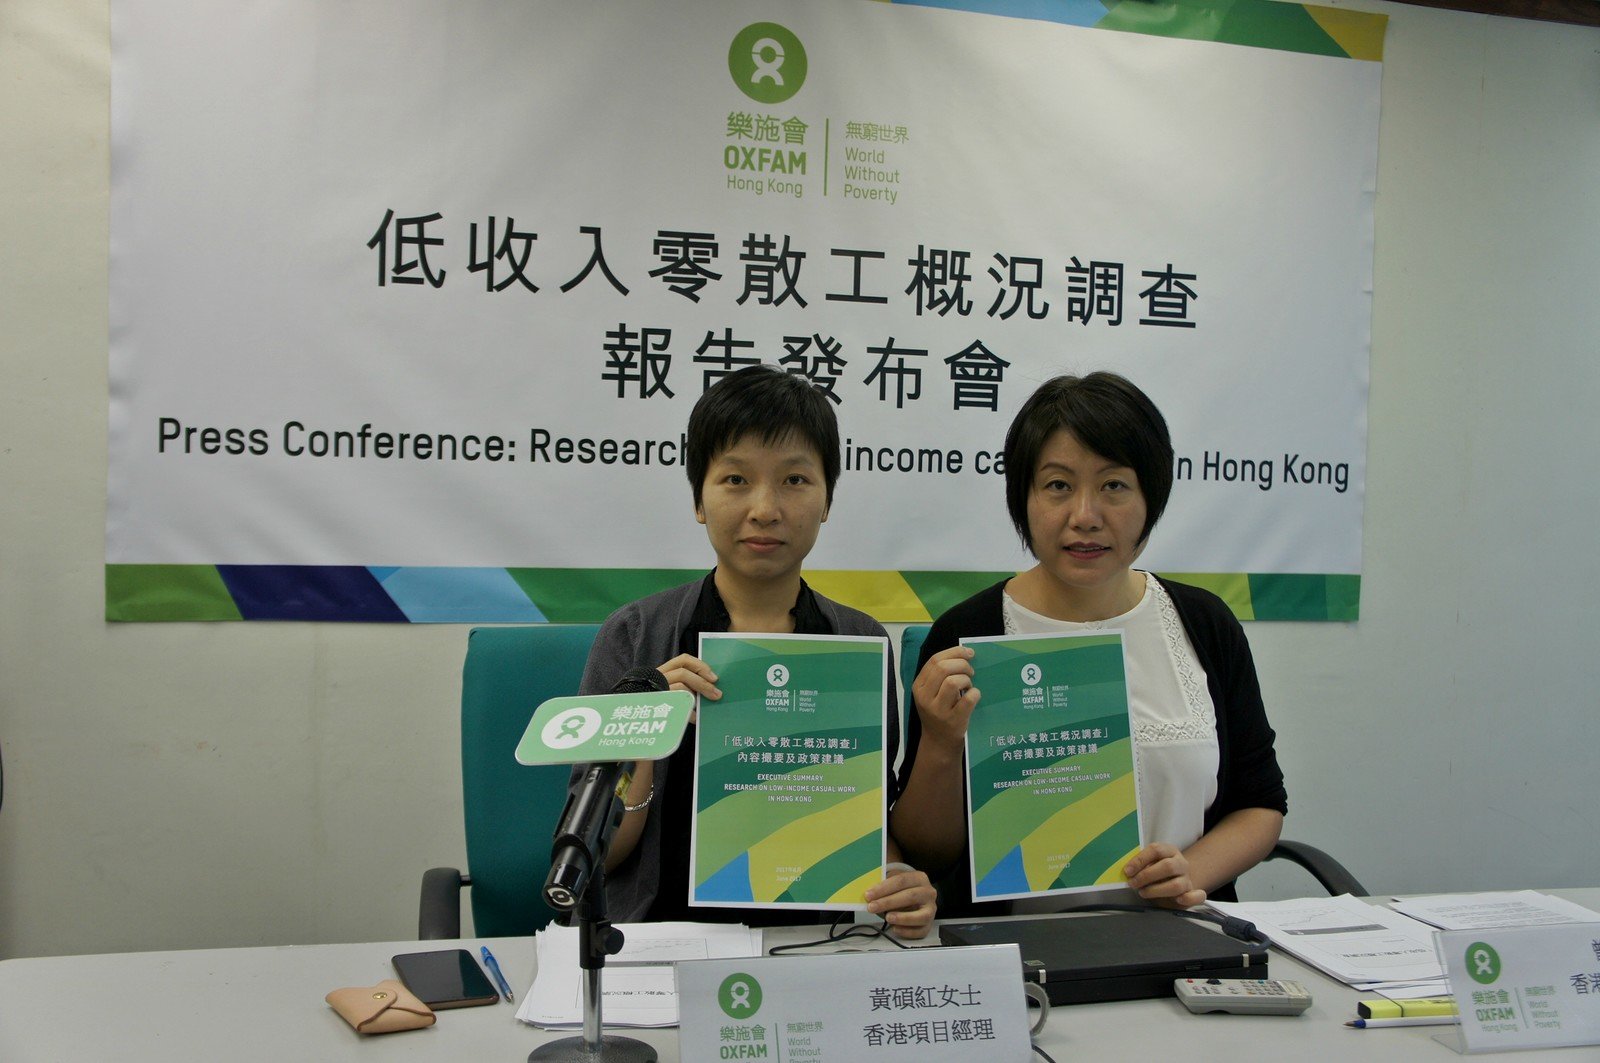 Wong Shek-hung, Oxfam’s Hong Kong Programme Manager (left), and Kalina Tsang, Head of Oxfam’s Hong Kong, Macau, Taiwan Programme (right), announcing the release of Oxfam’s latest report ‘Research on Low-Income Casual Work in Hong Kong’